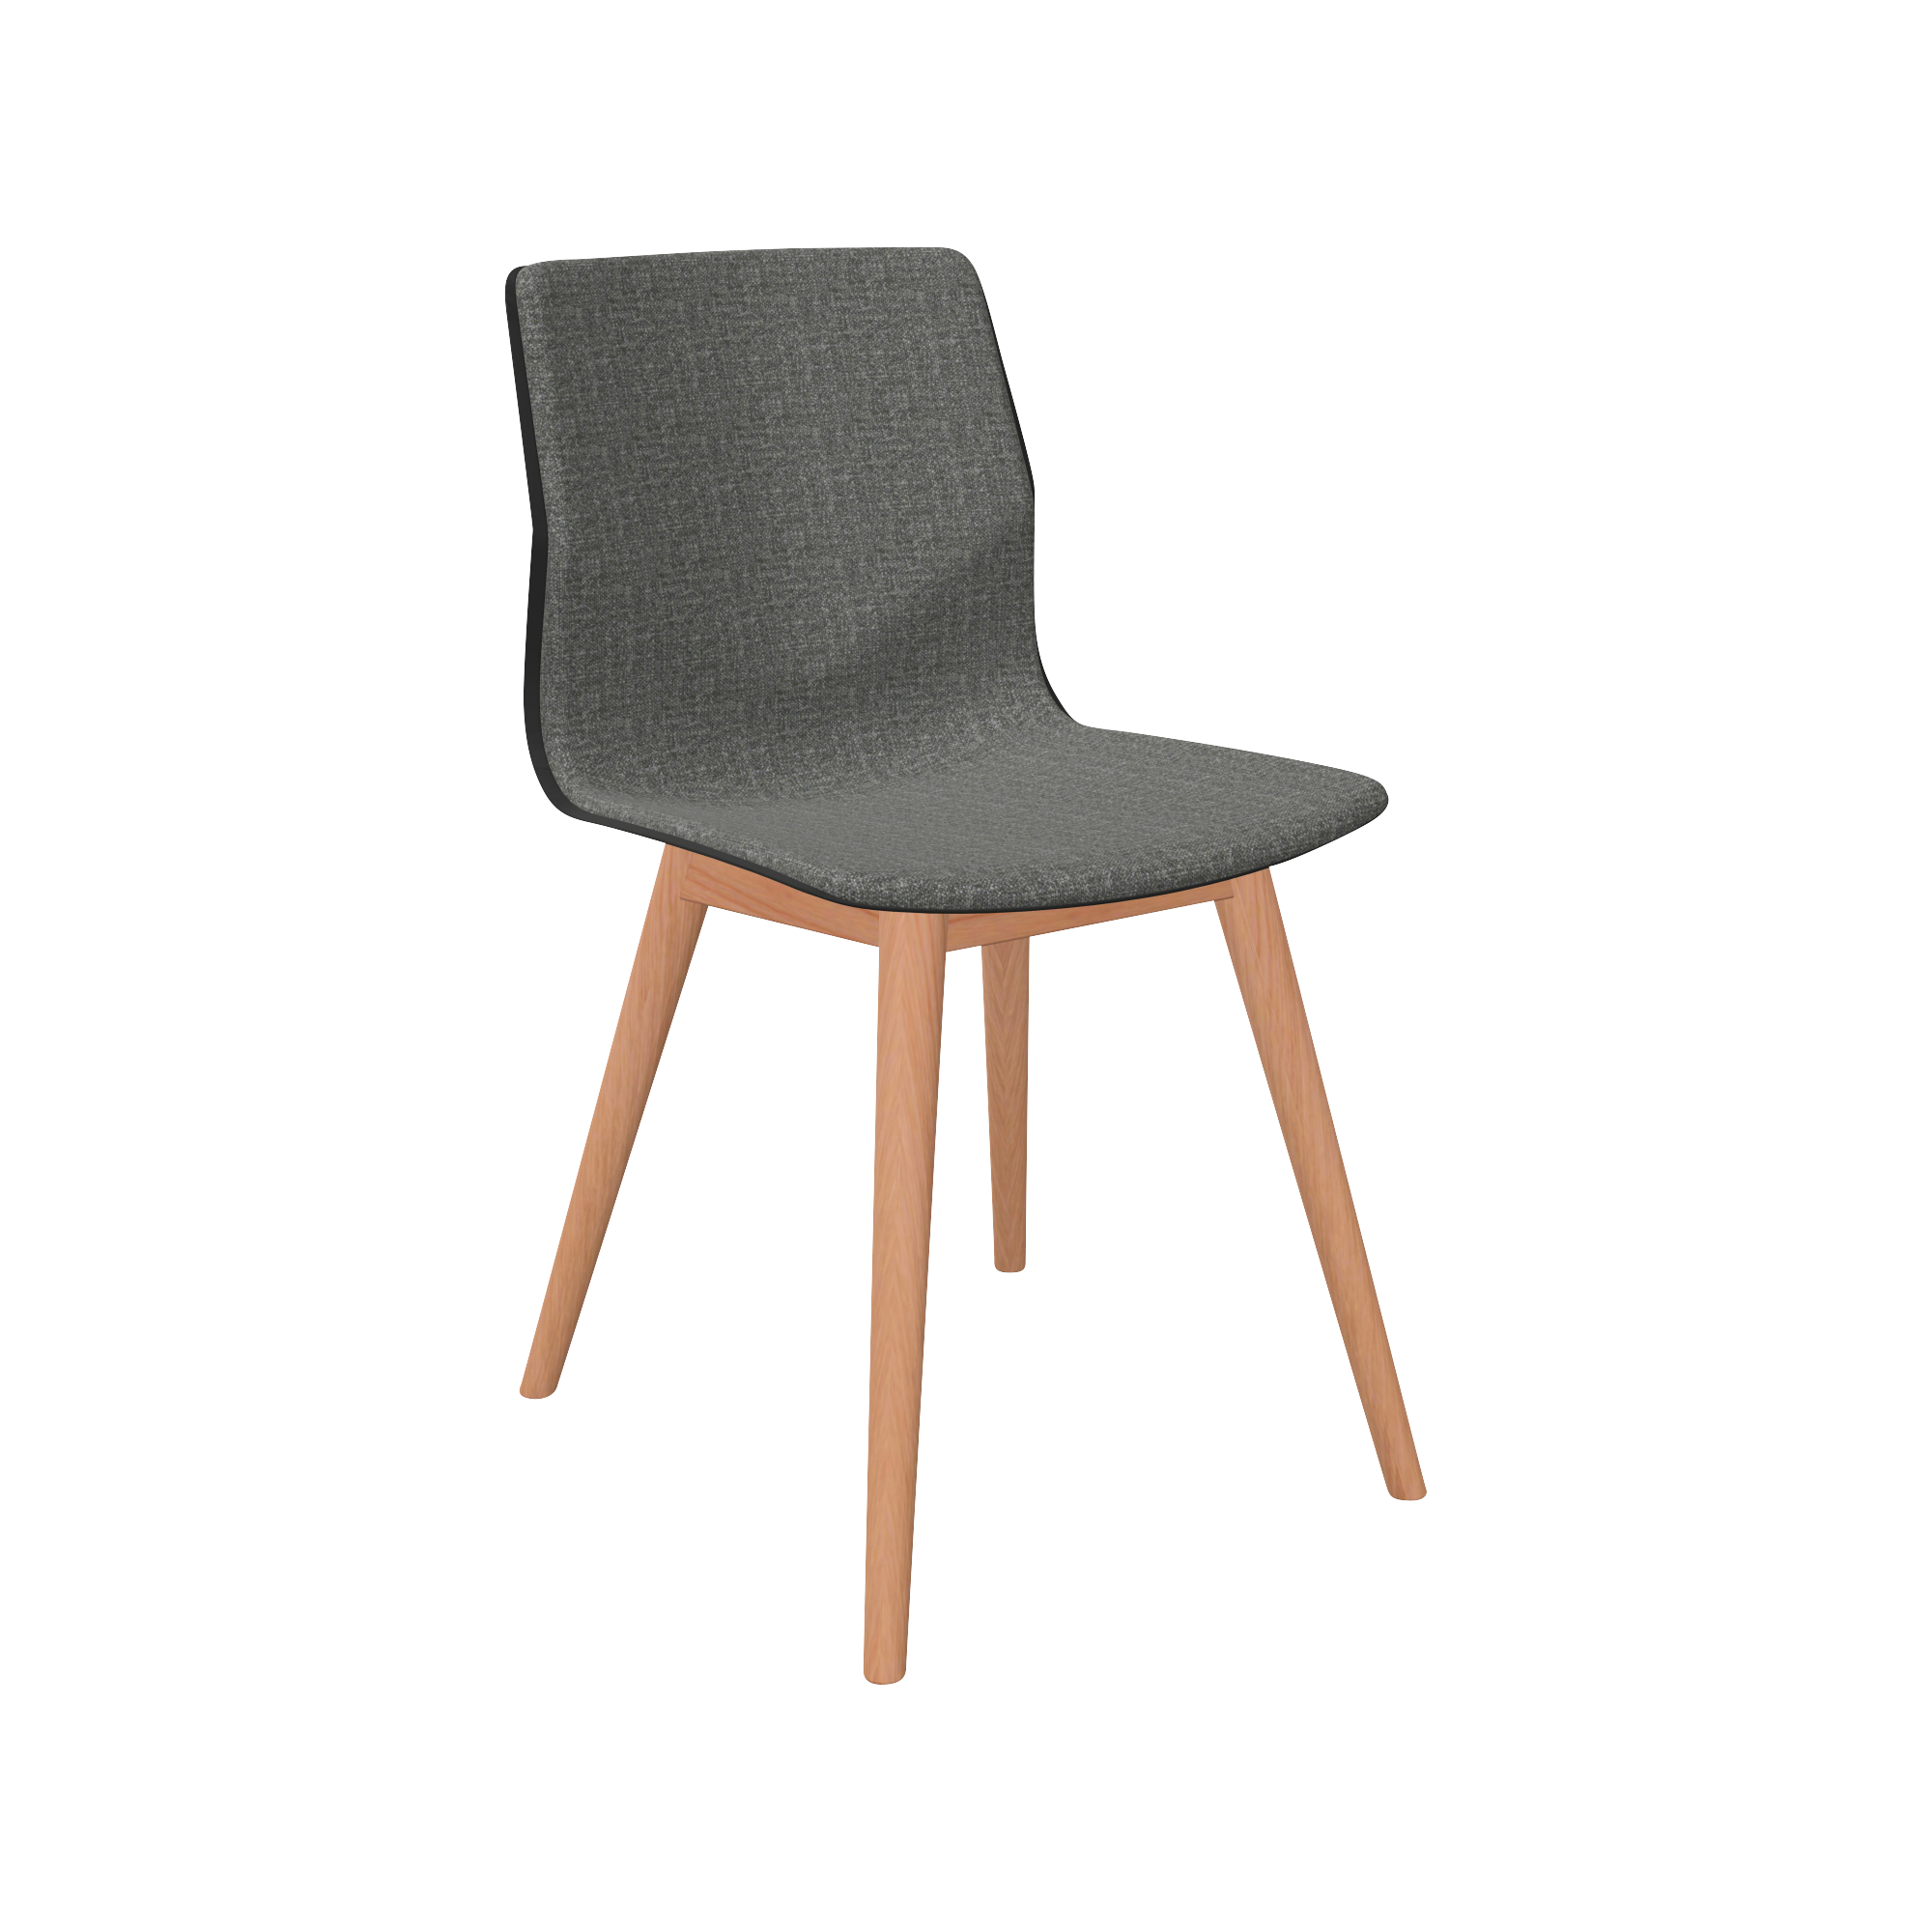 A grey dining chair with wooden legs.